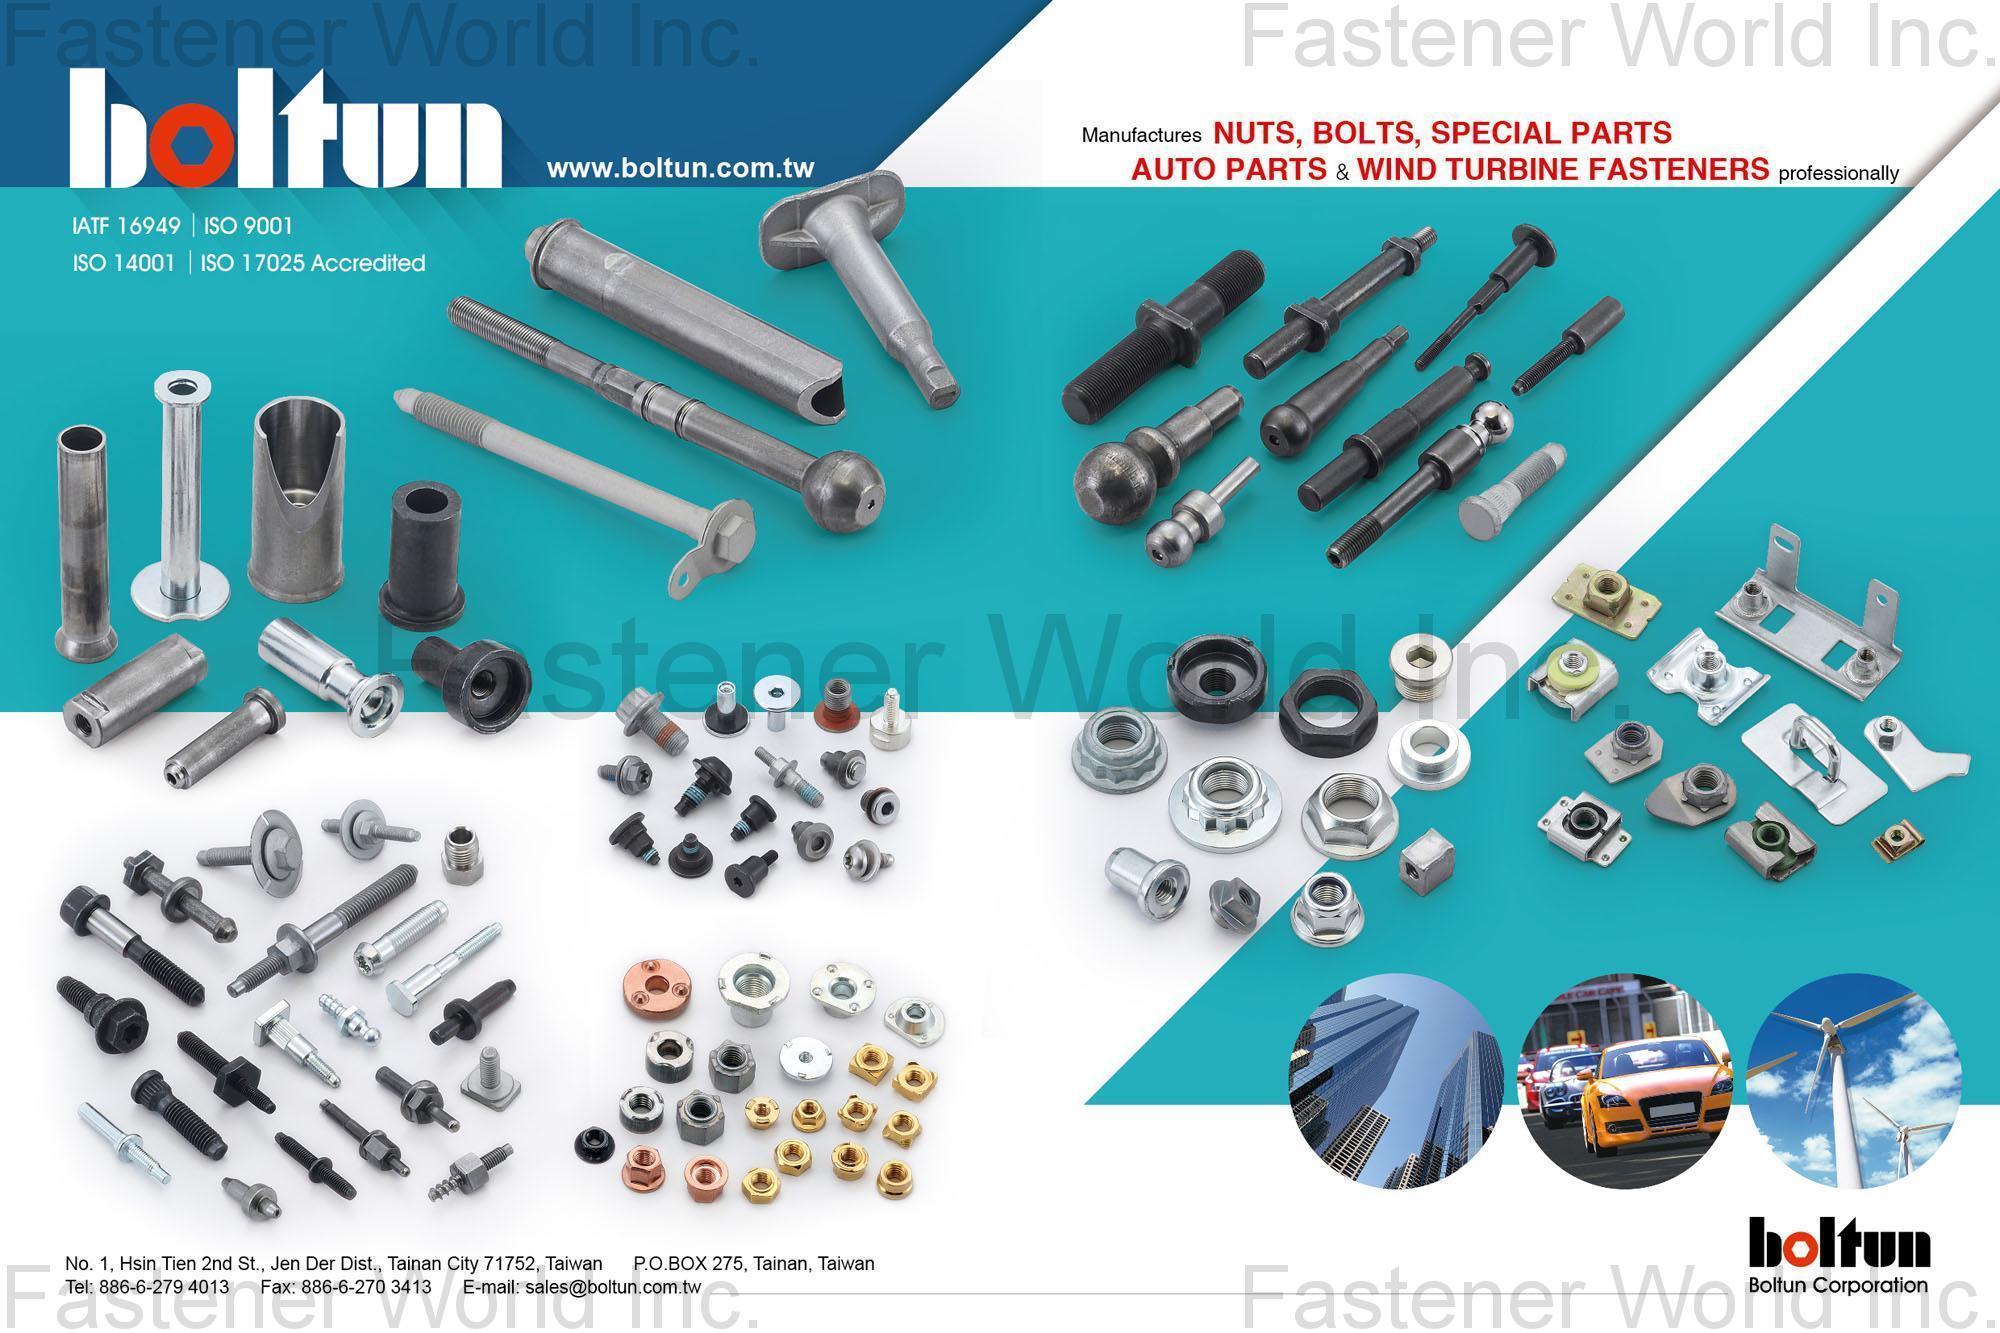 BOLTUN CORPORATION  , Welding Nuts,Rivet Nuts,Clinch Nuts,Locking Nuts,Nylon Insert Nuts,Conical Washer Nuts,T-Nuts,CNC Machining Parts,Stamping Parts,Bushed & Sleeves,Assembly Components,Special Parts,HEX. Bolt & Screw,Flange Bolt,Socket,Sems,Screw With Welding Projection,Screw With Welding Ring & Points,Clinch Bolt,T C Bolt,Special Pin,Wheel Bolt,Rail Bolt,Rail Bolts Construction Fasteners: Nuts, Screws & Washers,Wind Turbine Fasteners Kits: Nuts, Bolts & Washers Truck Wheel Bolts,Bolts & Nuts & Components,Motorcycle parts,Nylon rings & special washer,Expansion Bolt , Automotive Parts